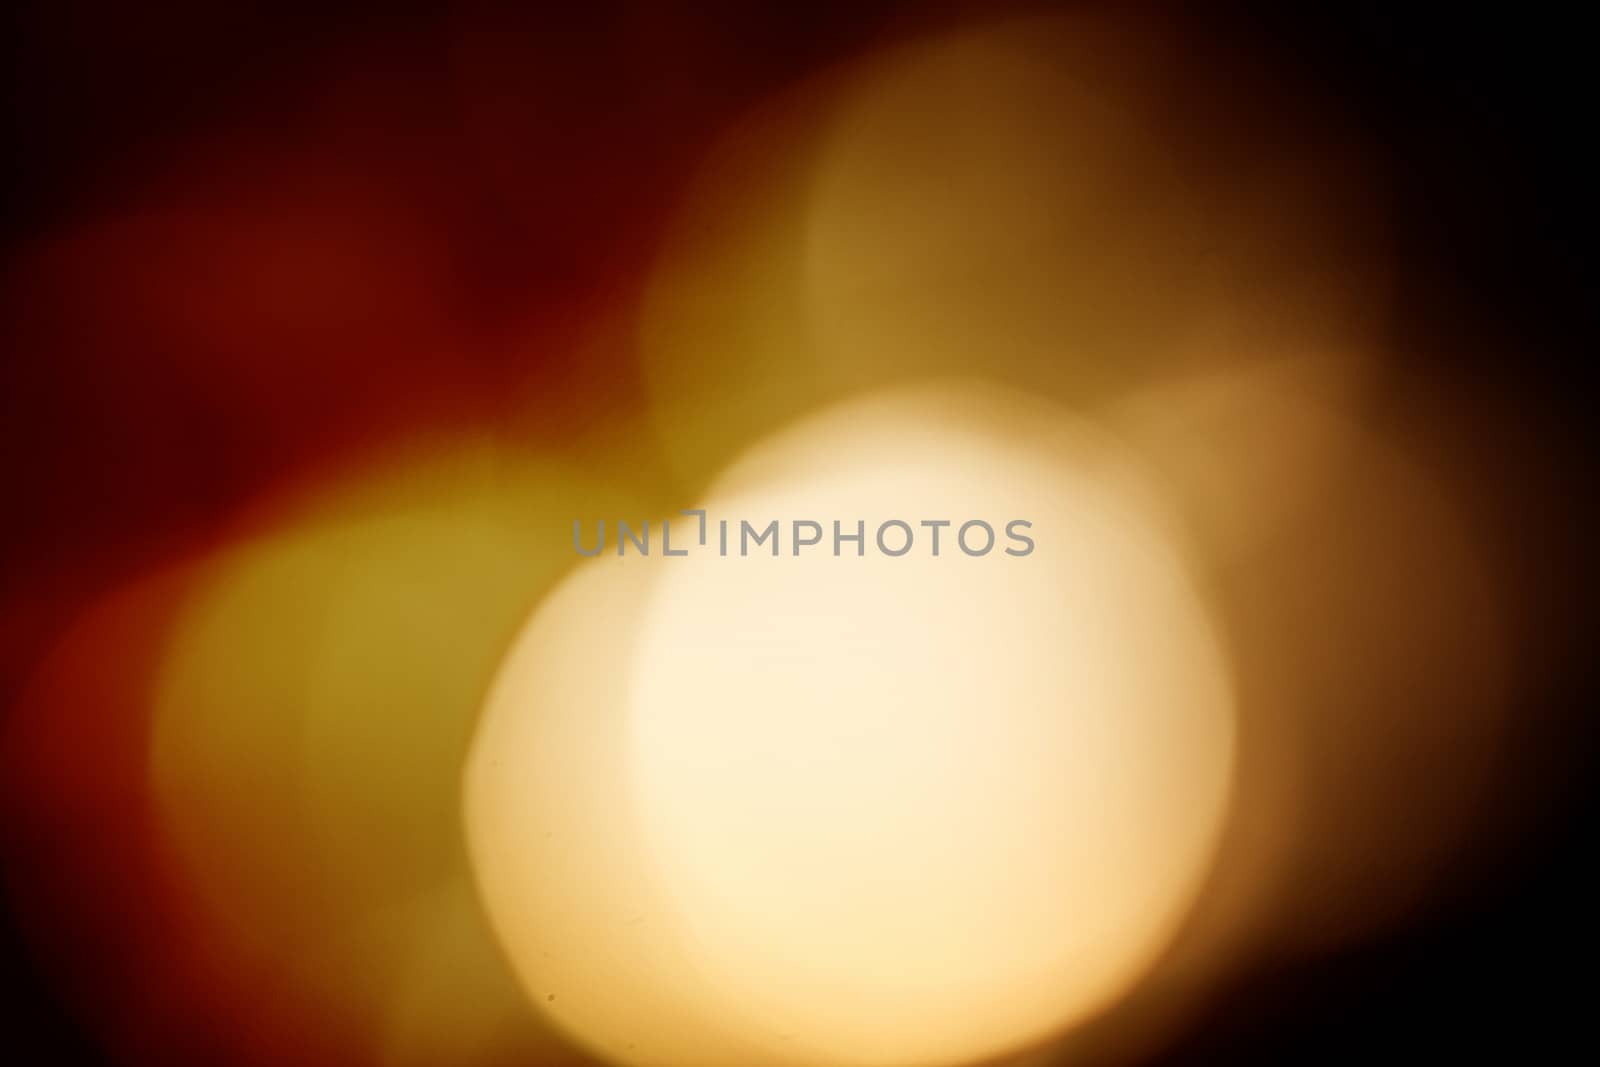 Blur image of an abstract light background